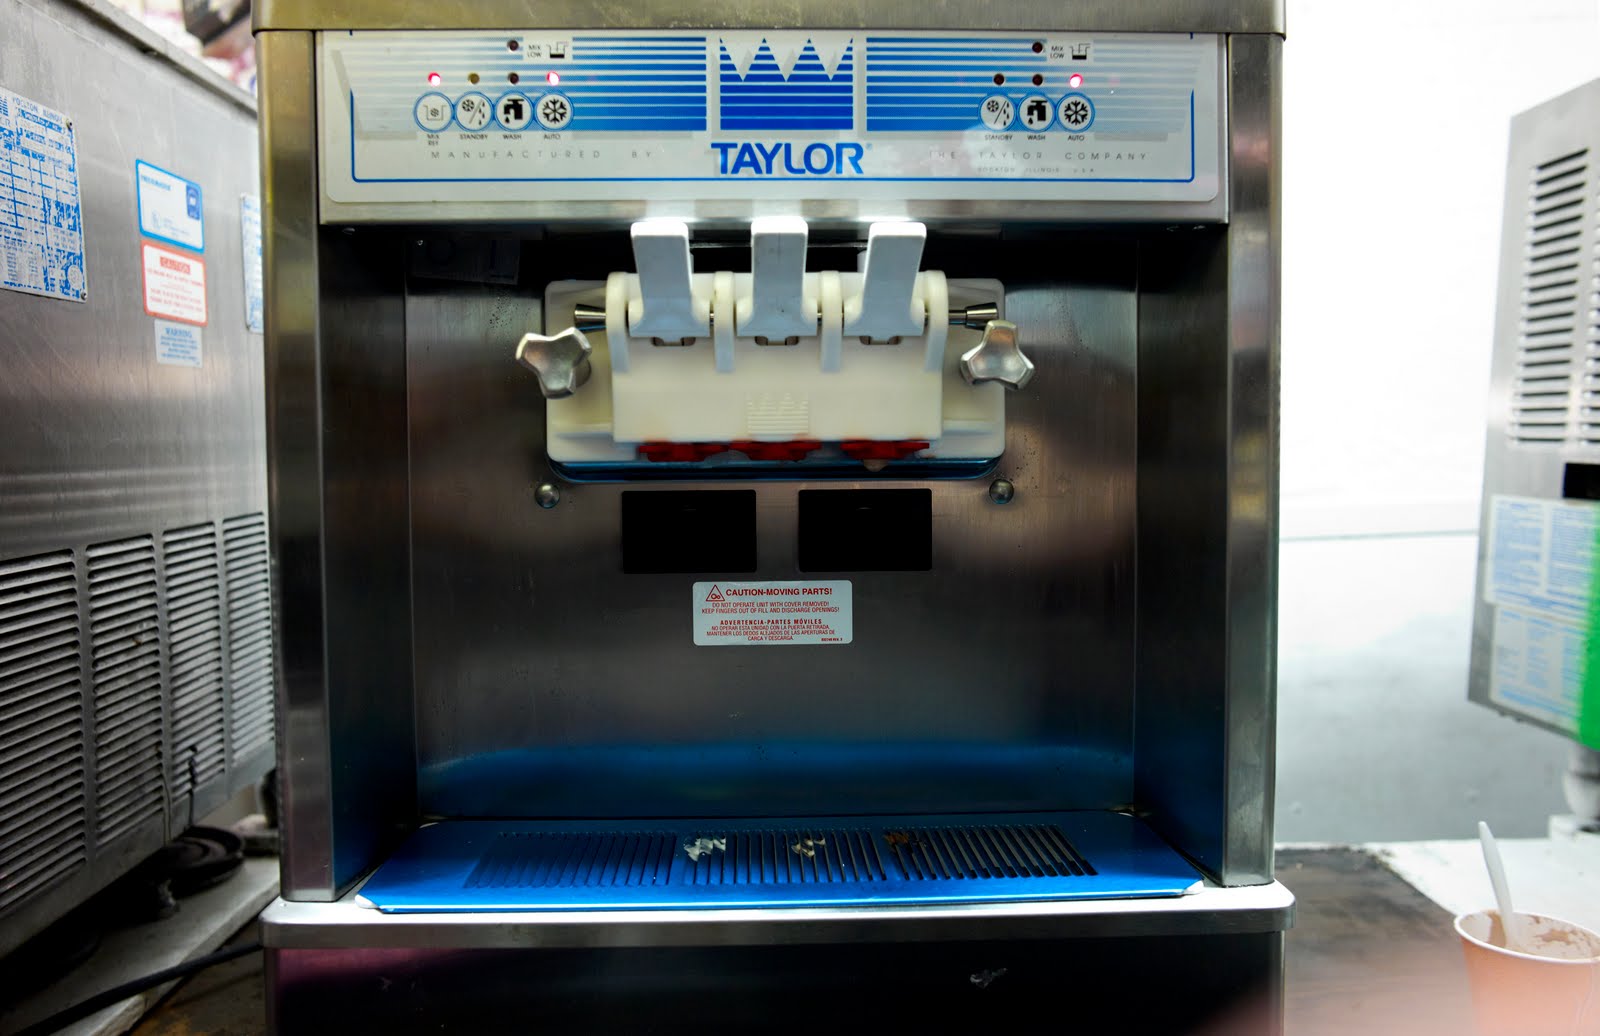 Neither more nor less: Ray's New Taylor Ice Cream Machine ...